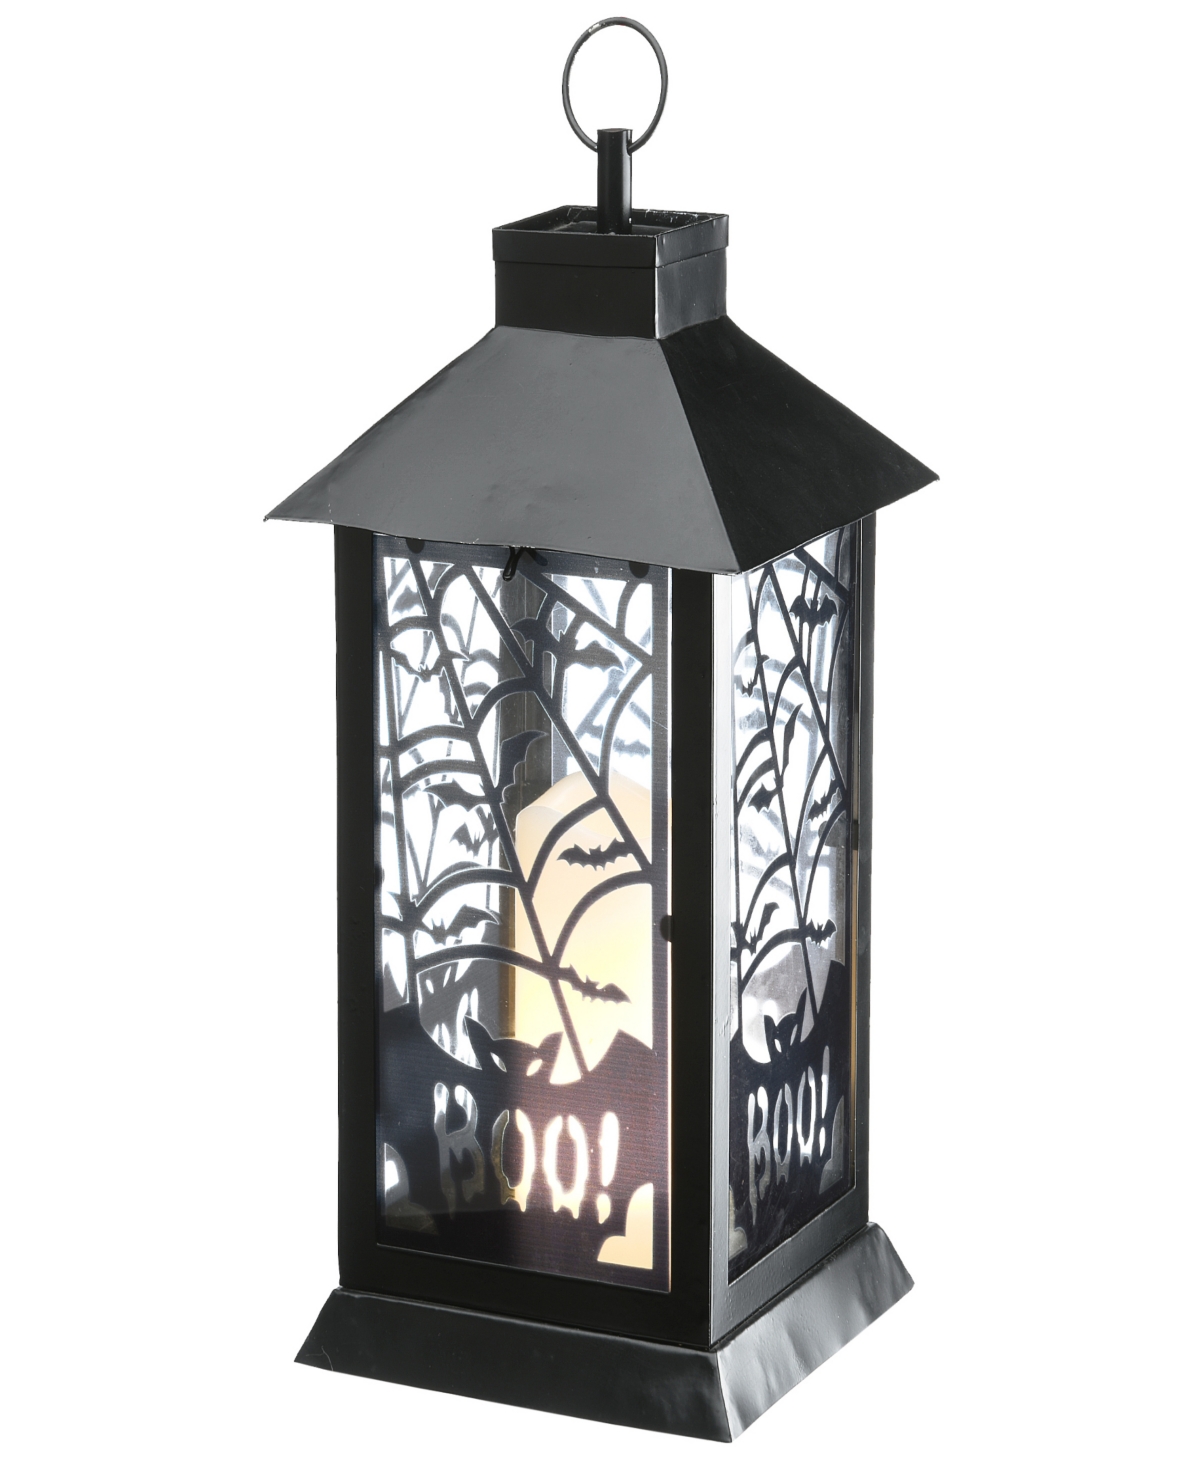 16" Halloween Lantern with Led Lights, Carved Images of Bats and Cobwebs, Halloween Collection - Black